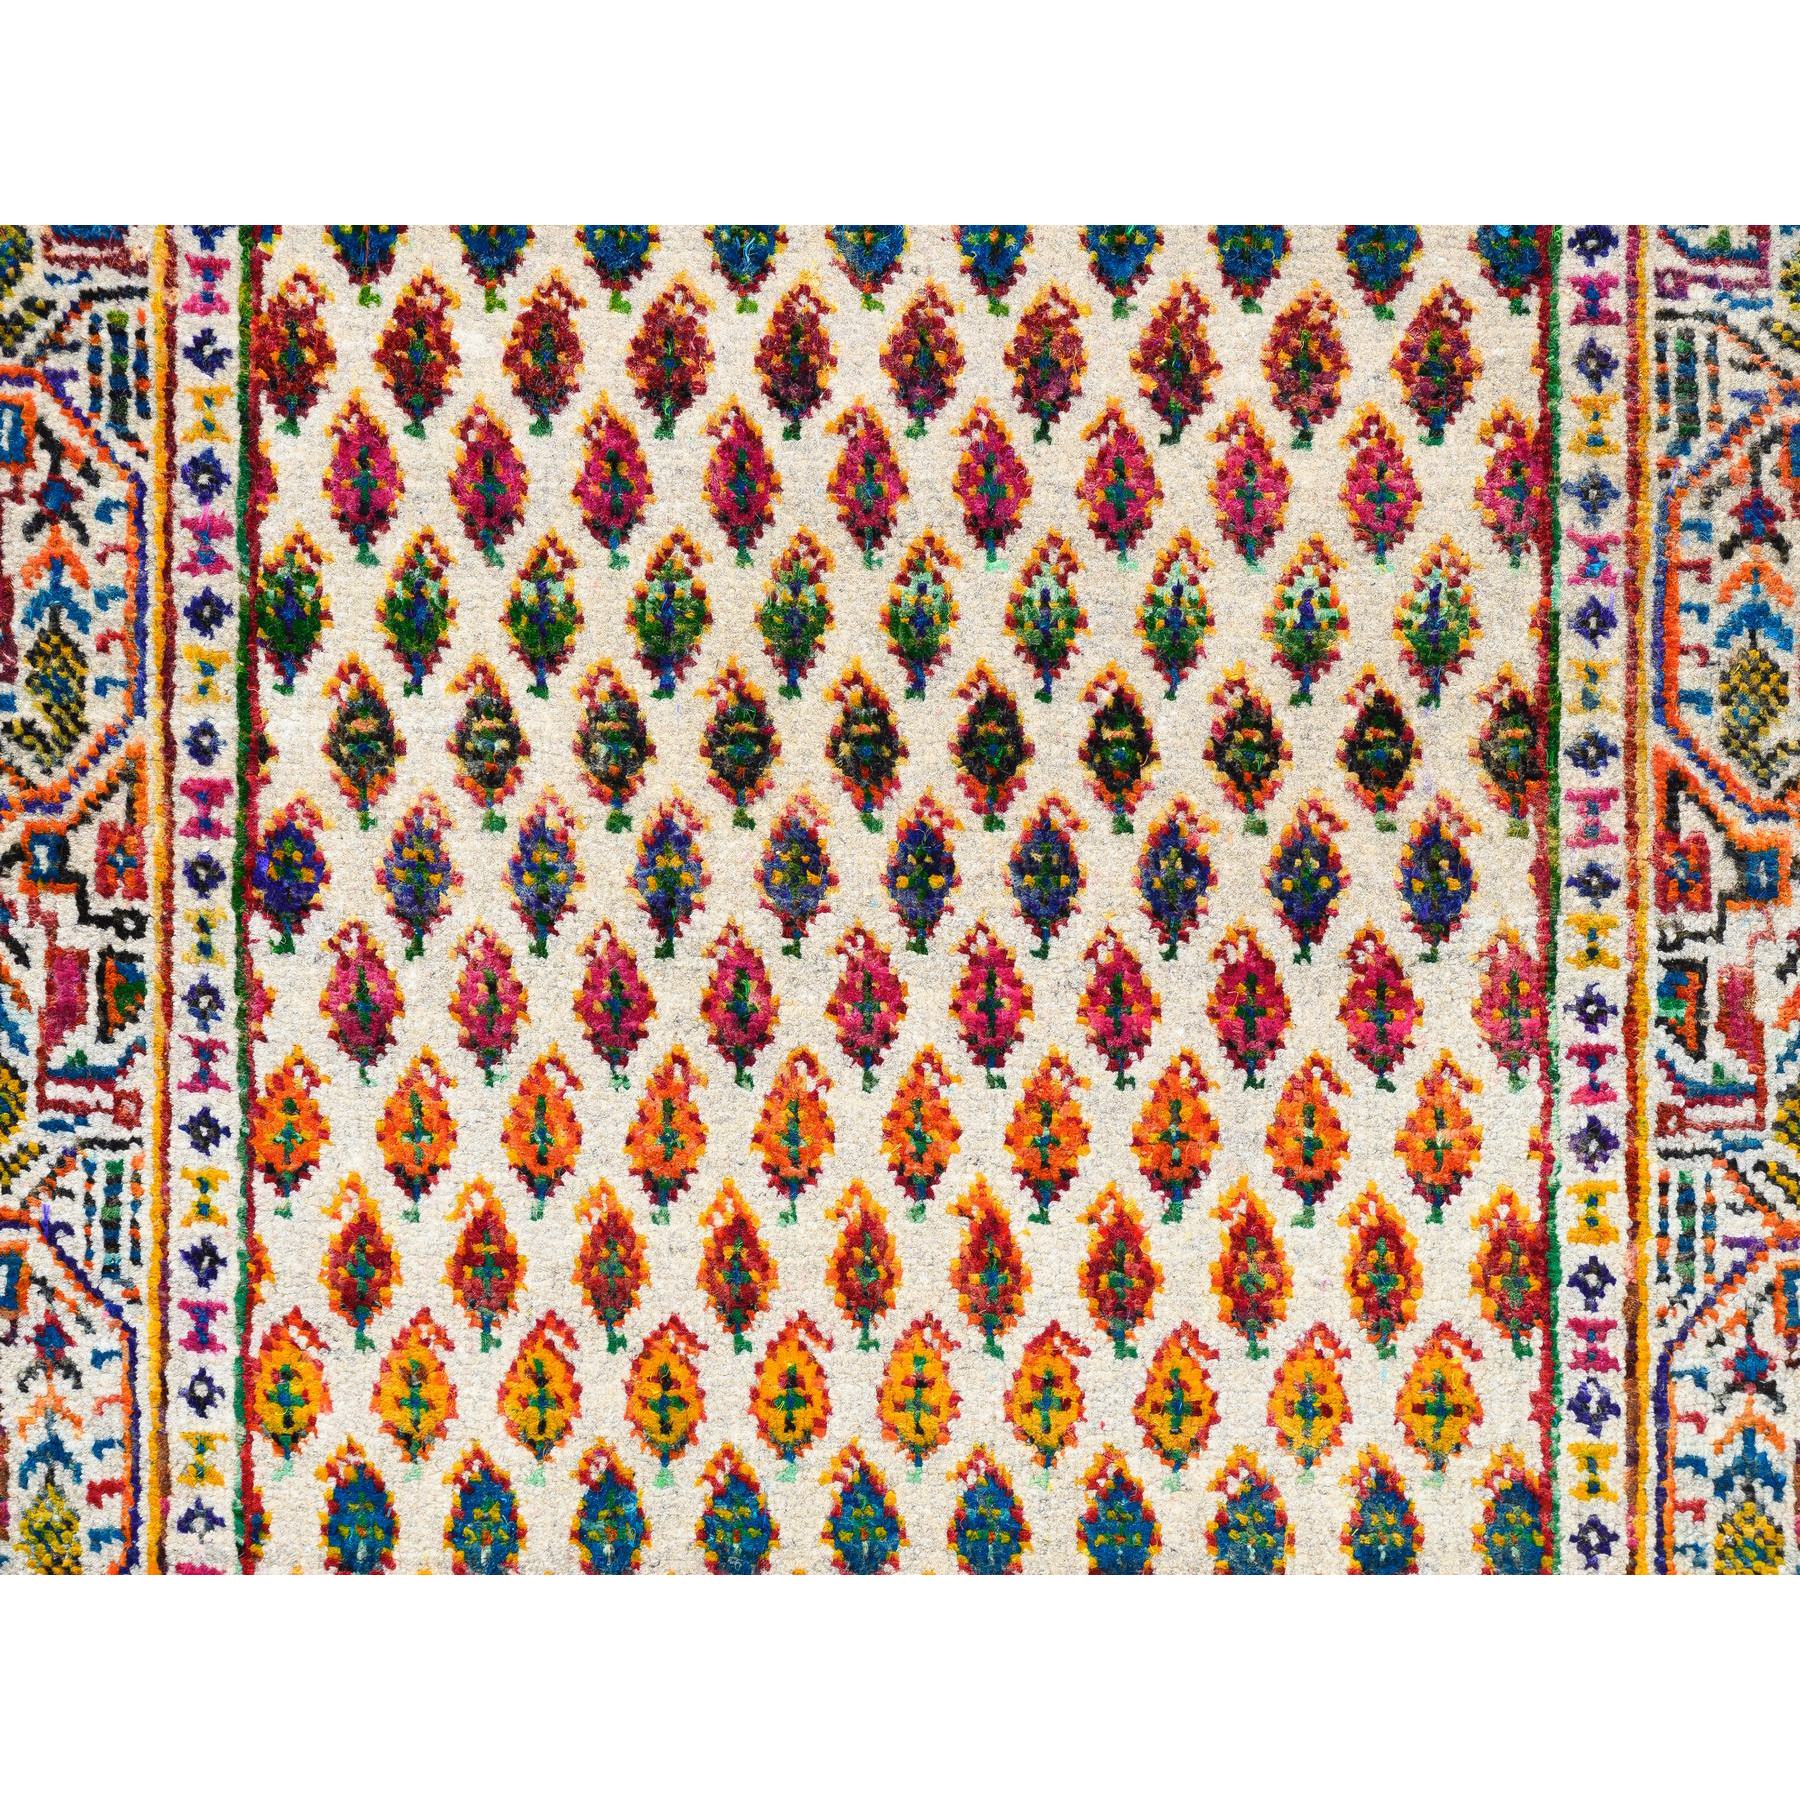 2'7"x8'1" Colorful Wool And Sari Silk Sarouk Mir Inspired With Repetitive Boteh Design Hand Woven Oriental Runner Rug 